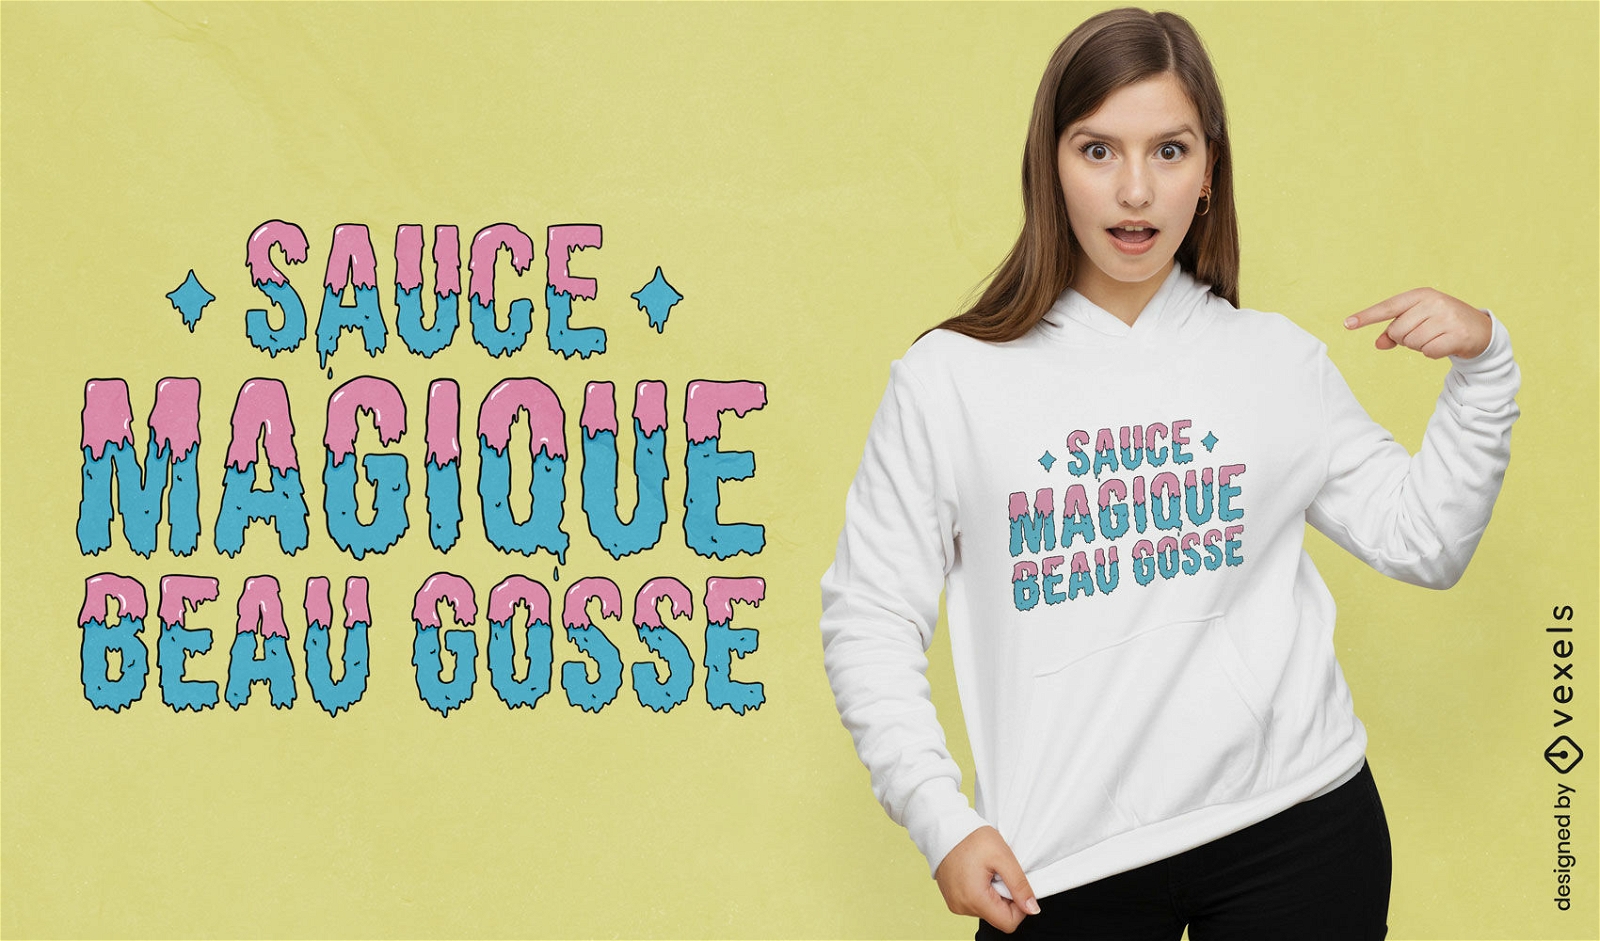 Funny and groovy french quote t-shirt design